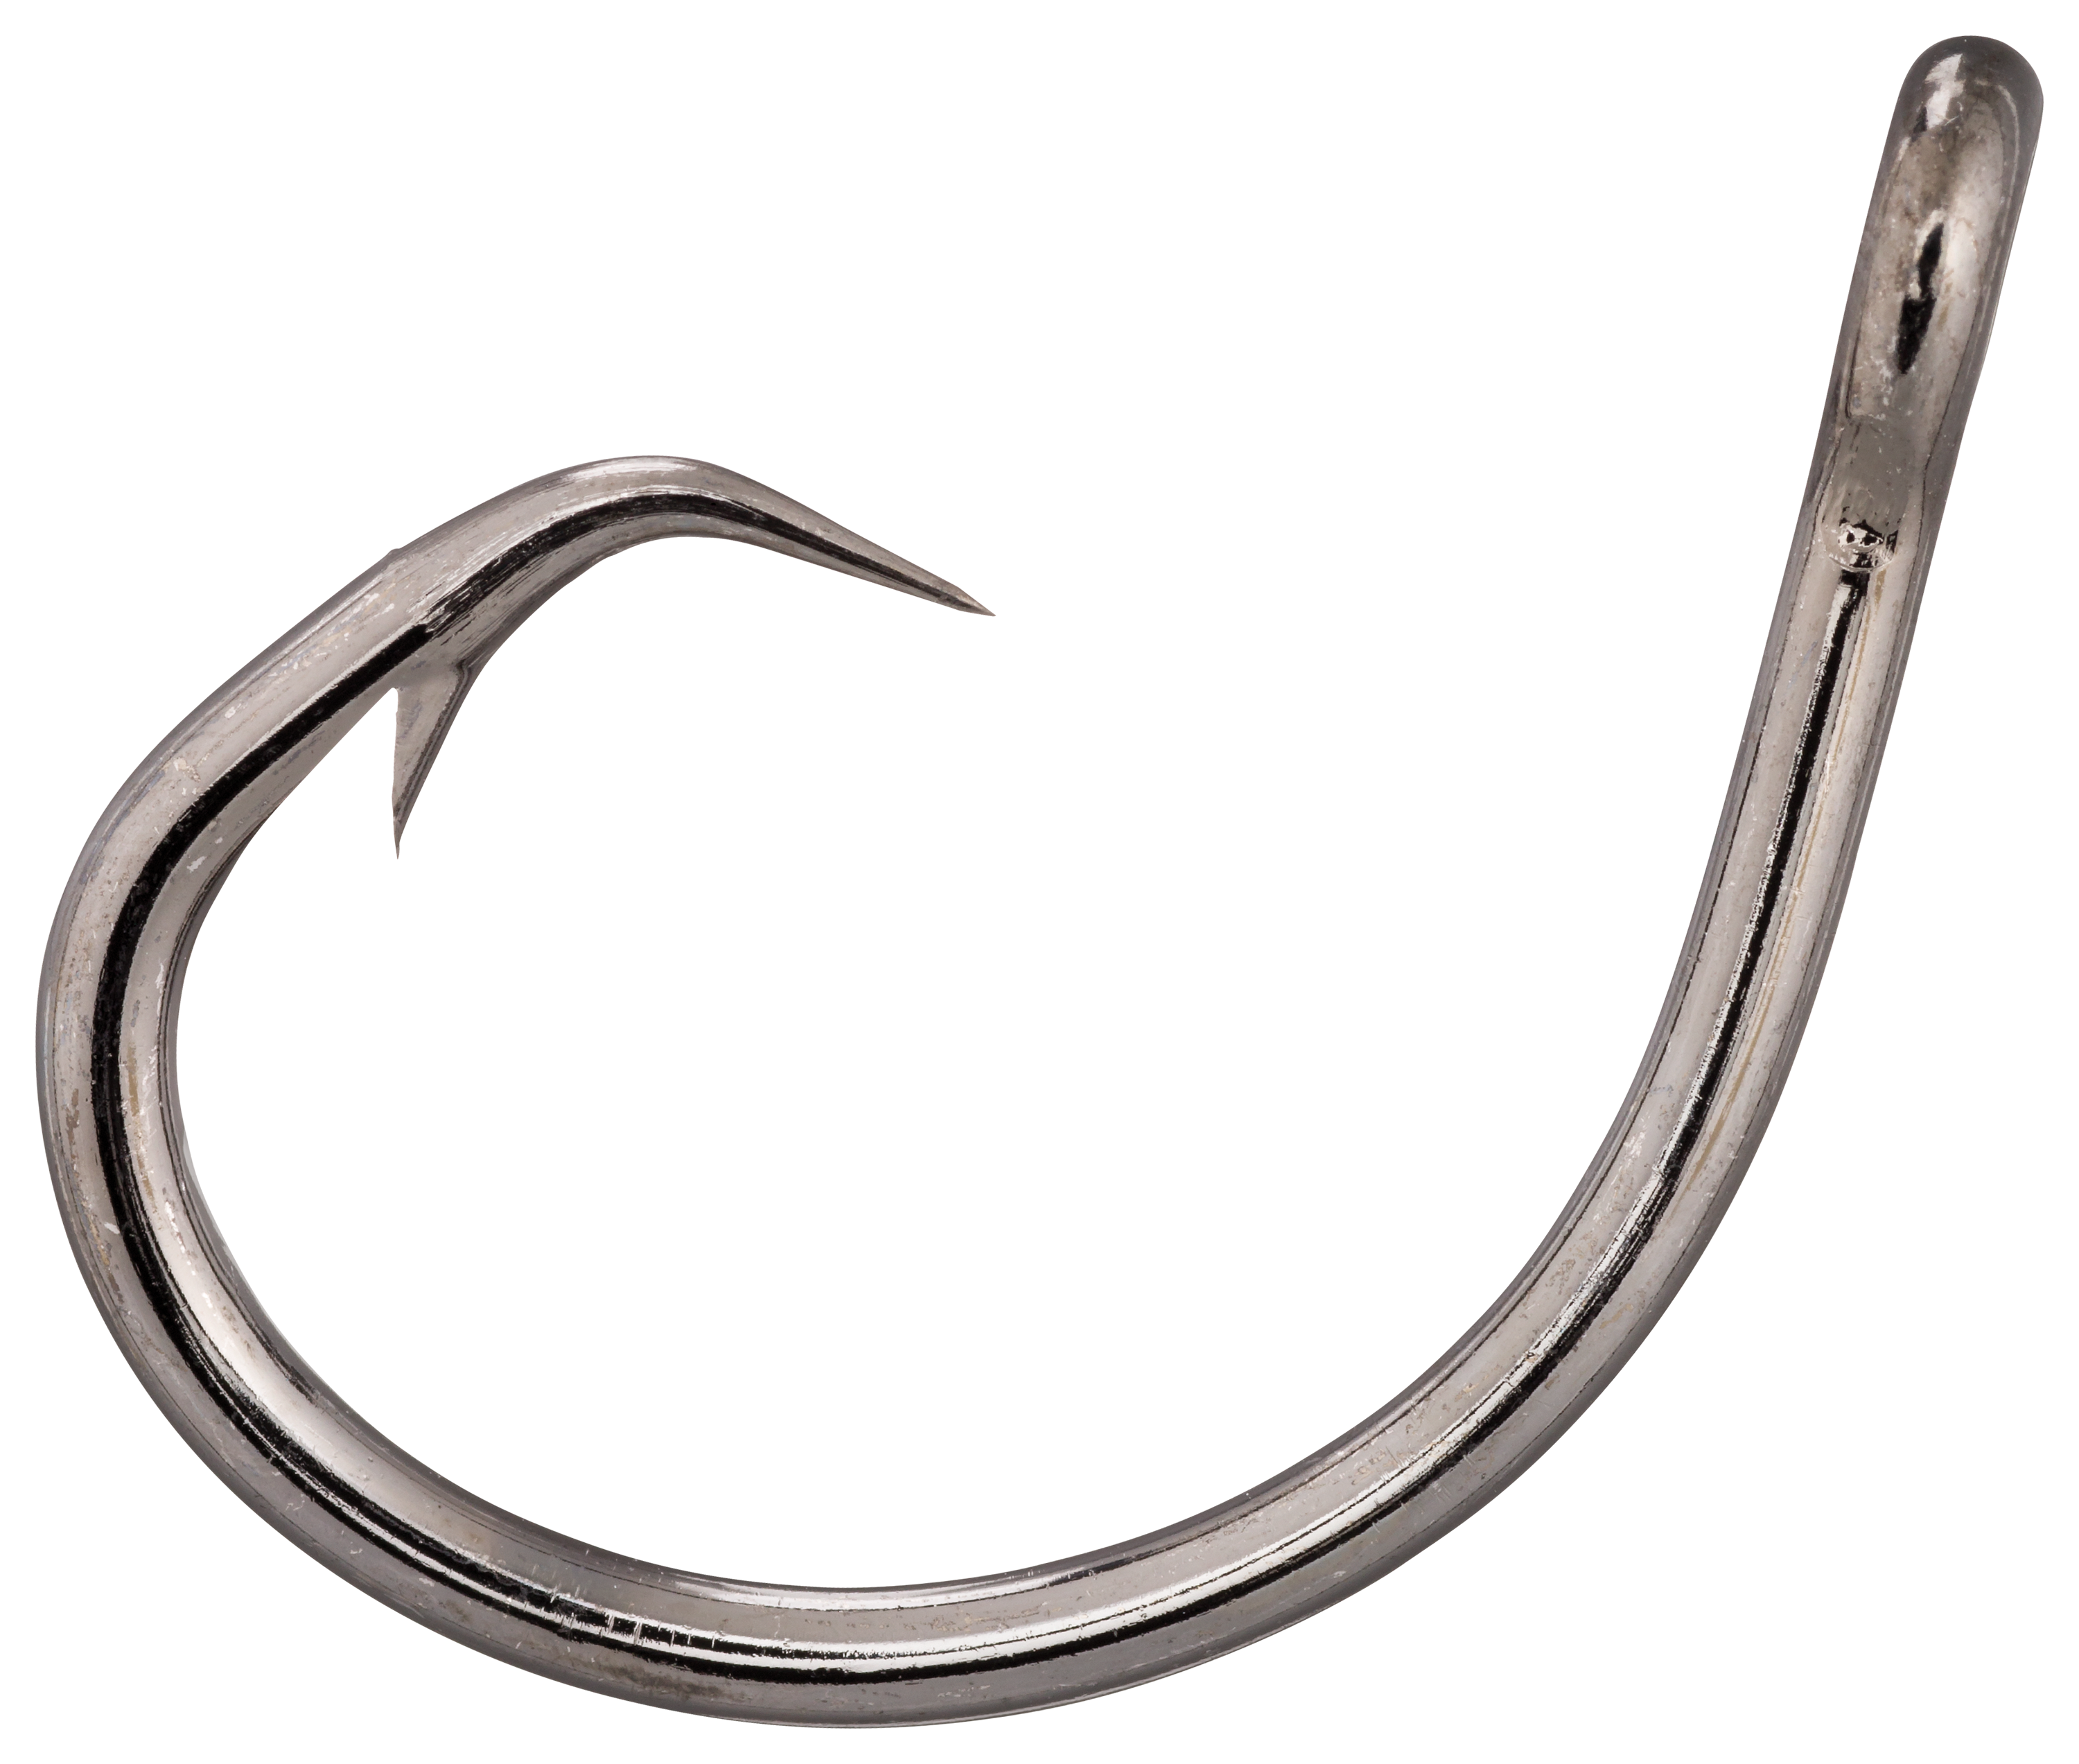 100 Mustad Fishing 39960d Duratin Circle Fish Hooks 10/0 for sale online